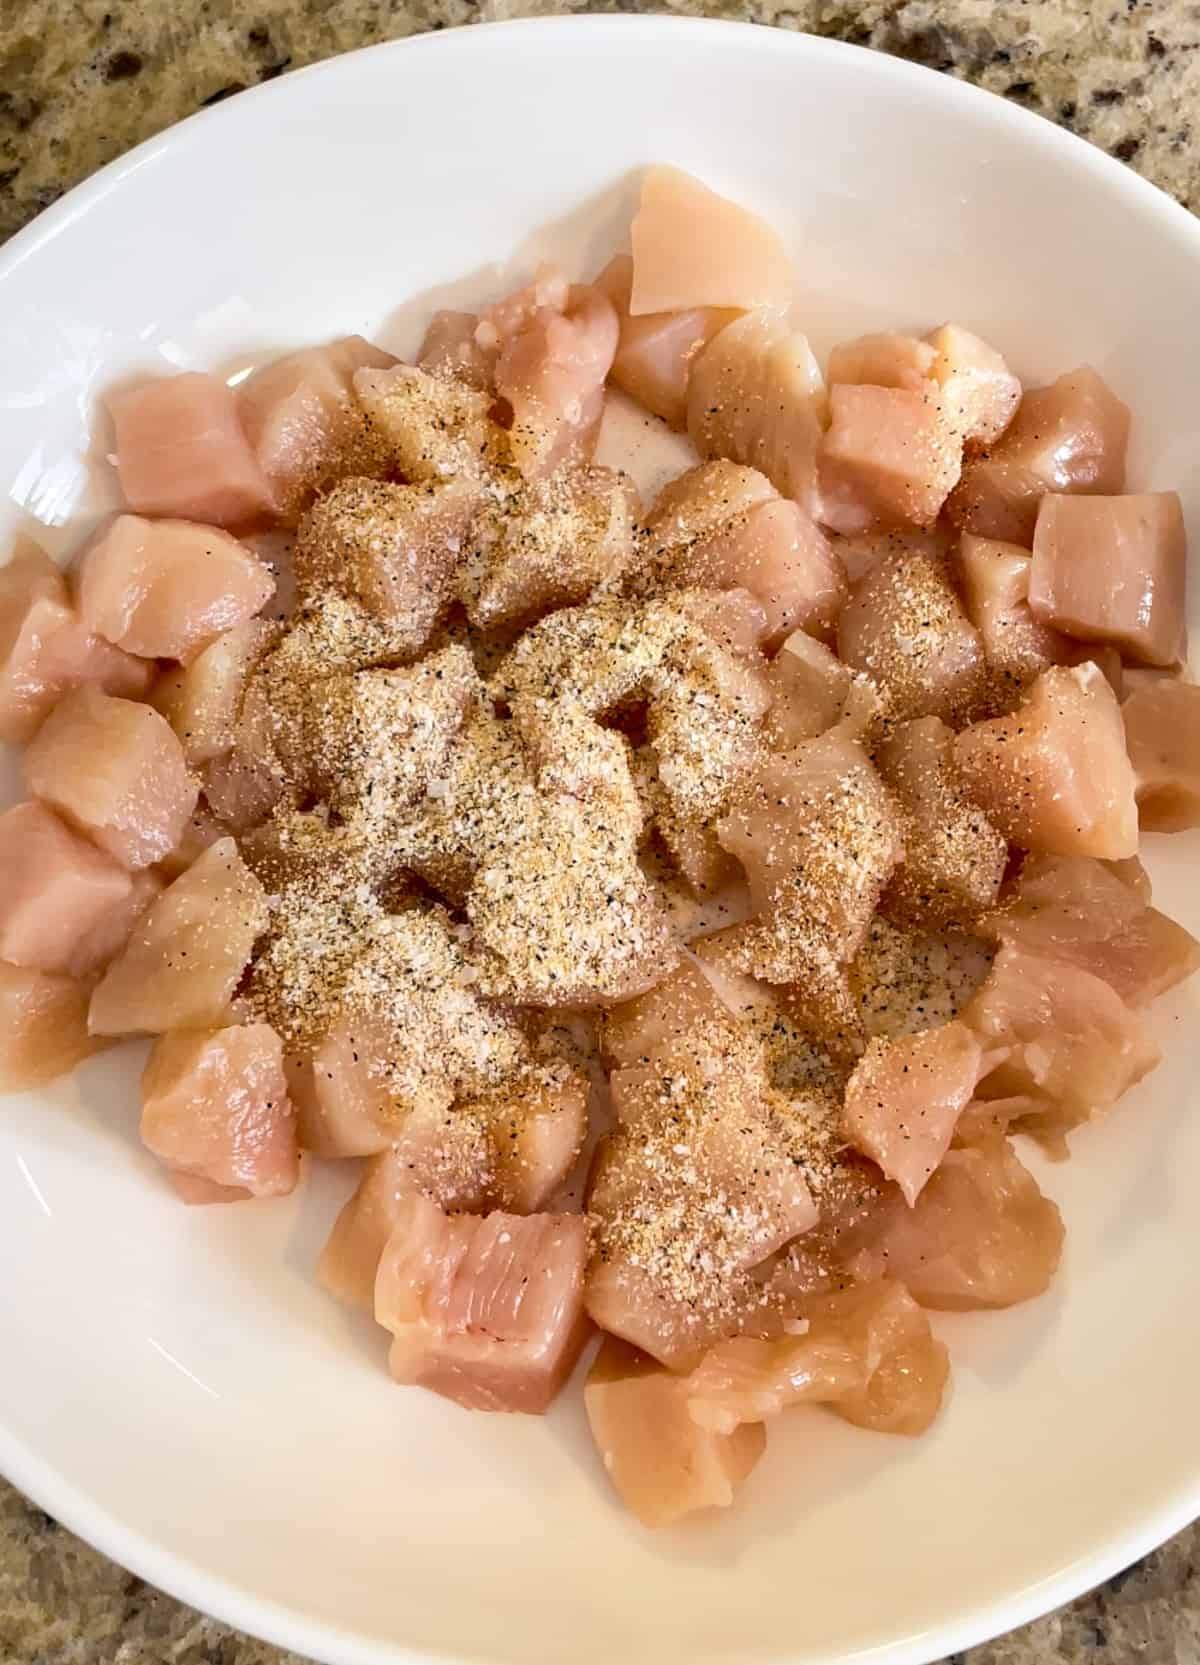 Diced chicken pieces topped with a seasoning mixture of garlic powder, salt, and pepper.